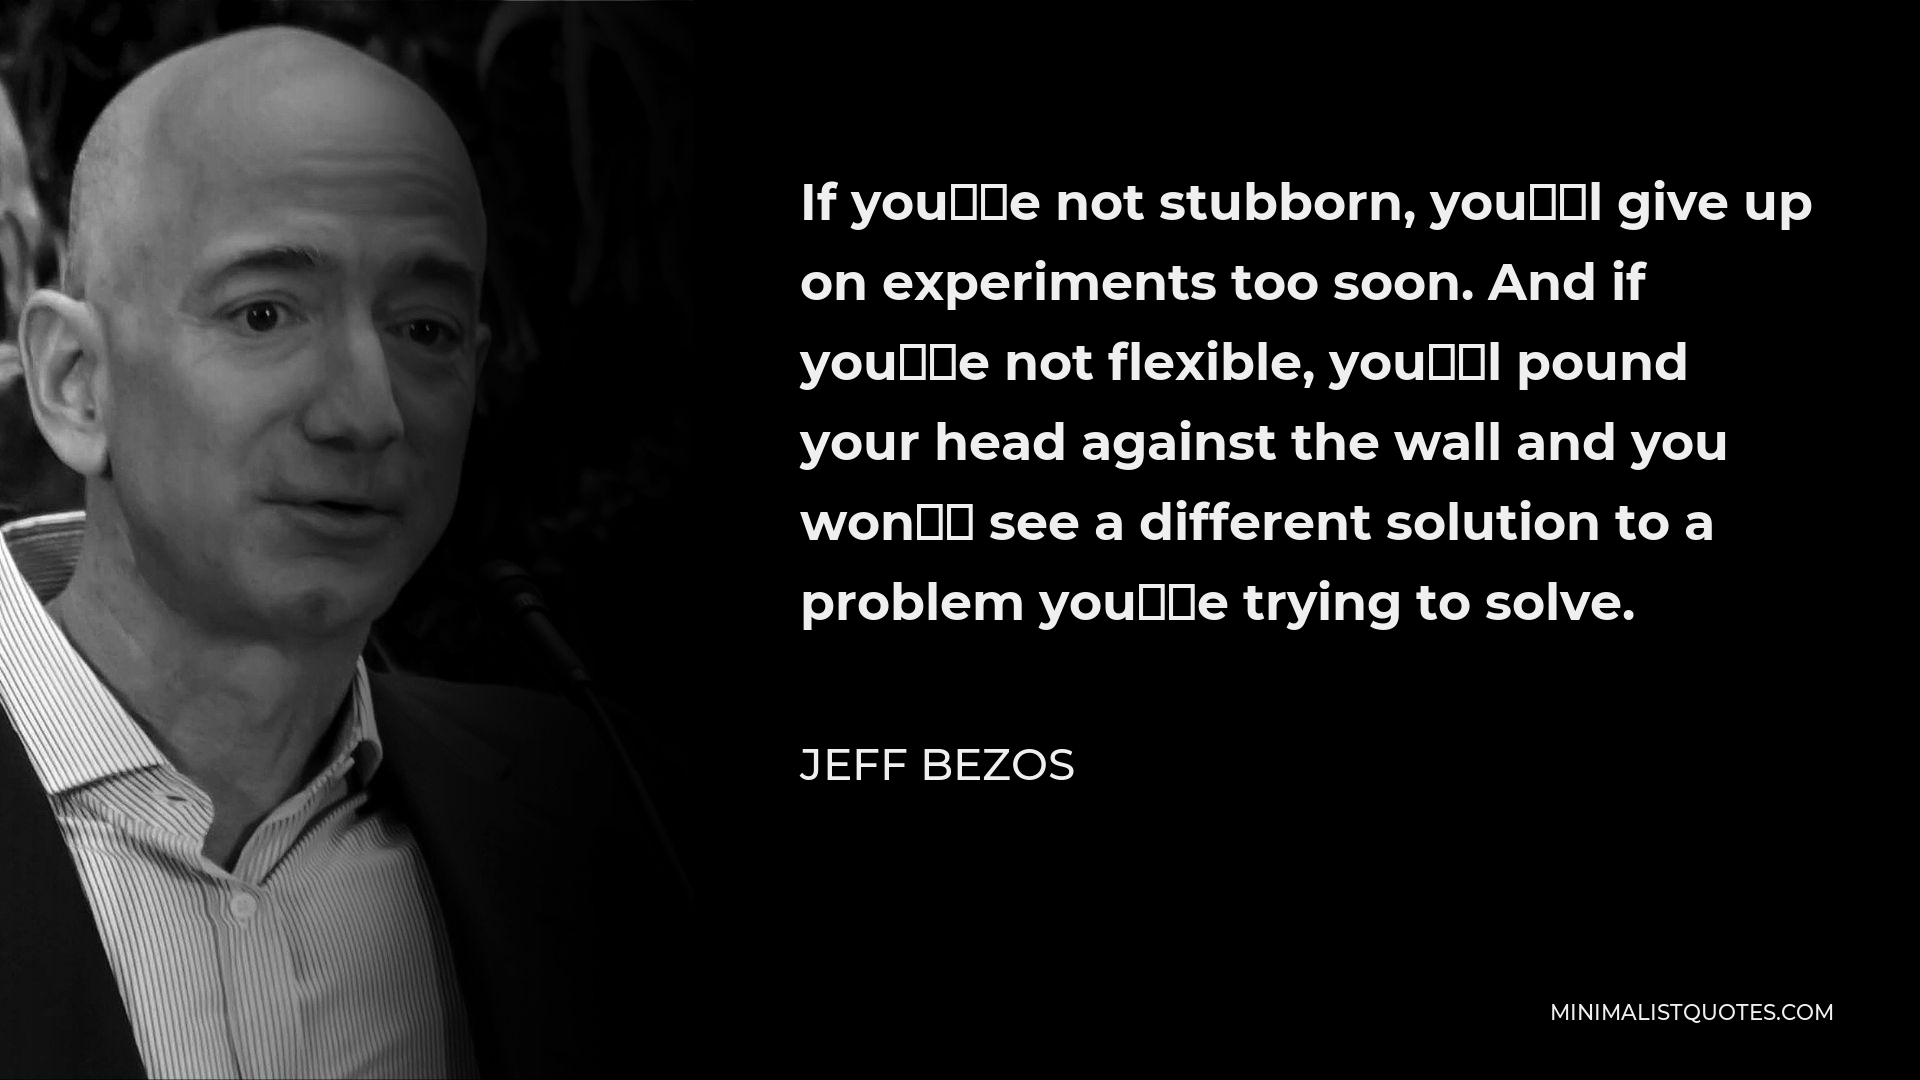 Jeff Bezos Quote - If you’re not stubborn, you’ll give up on experiments too soon. And if you’re not flexible, you’ll pound your head against the wall and you won’t see a different solution to a problem you’re trying to solve.